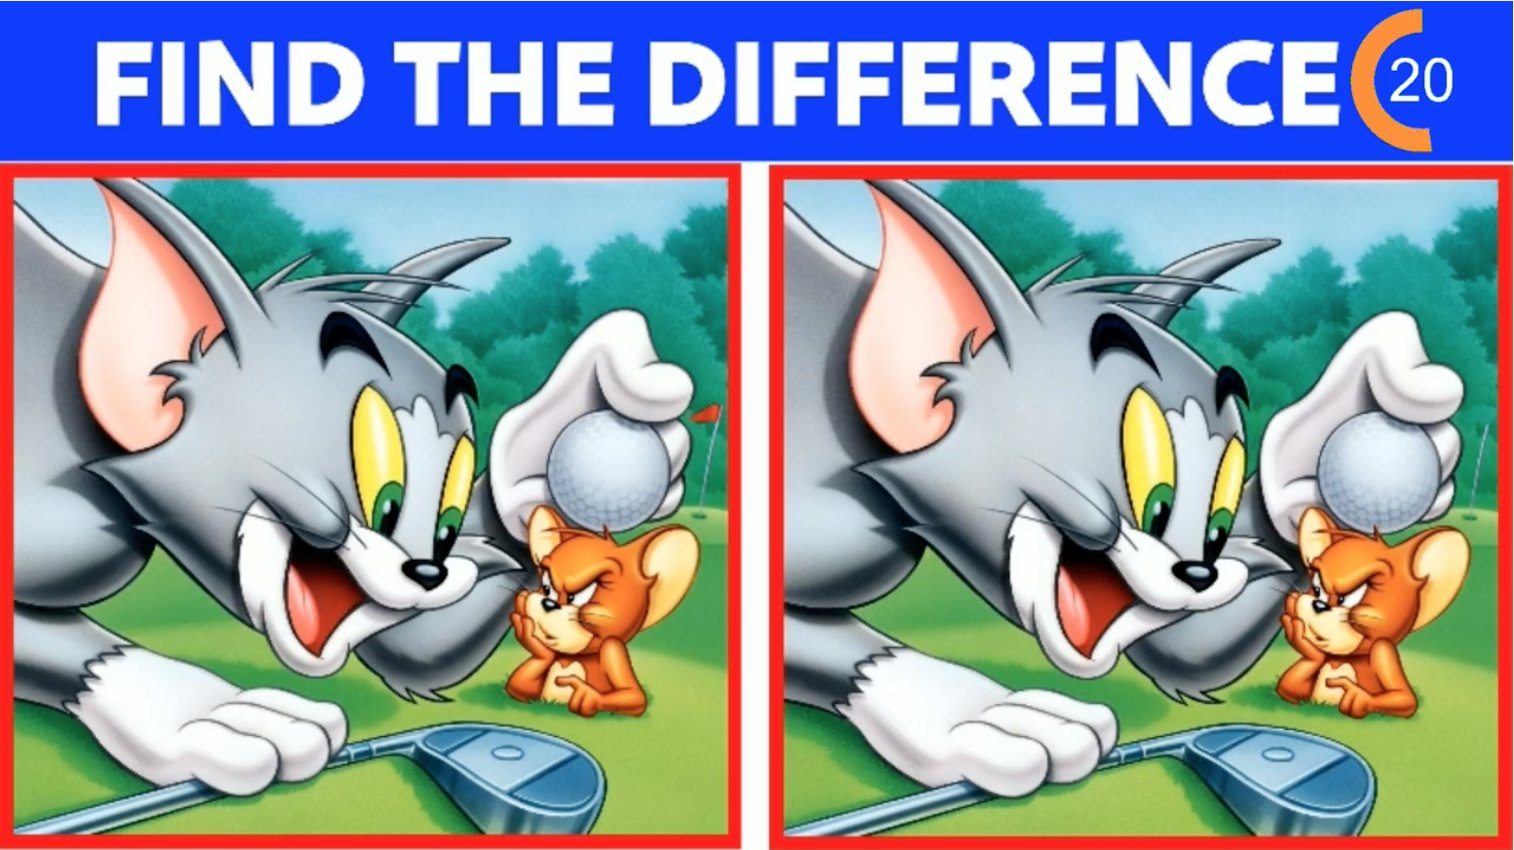 tom and jerry photo 1.png?resize=1200,630 - Can You Spot The Difference Between These Two Tom And Jerry Photos?